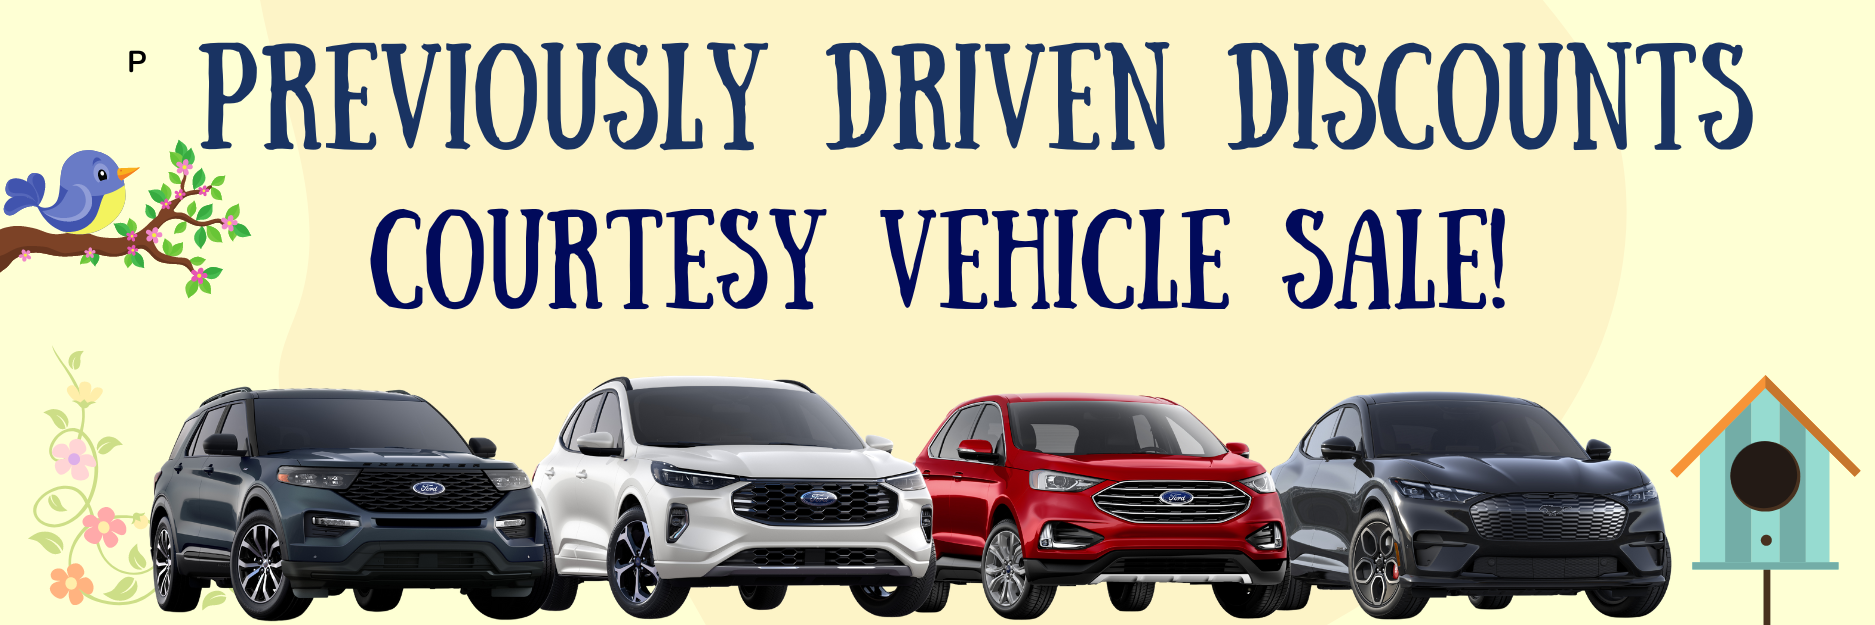 Previously Driven Discounts Courtesy Vehicle Sale!